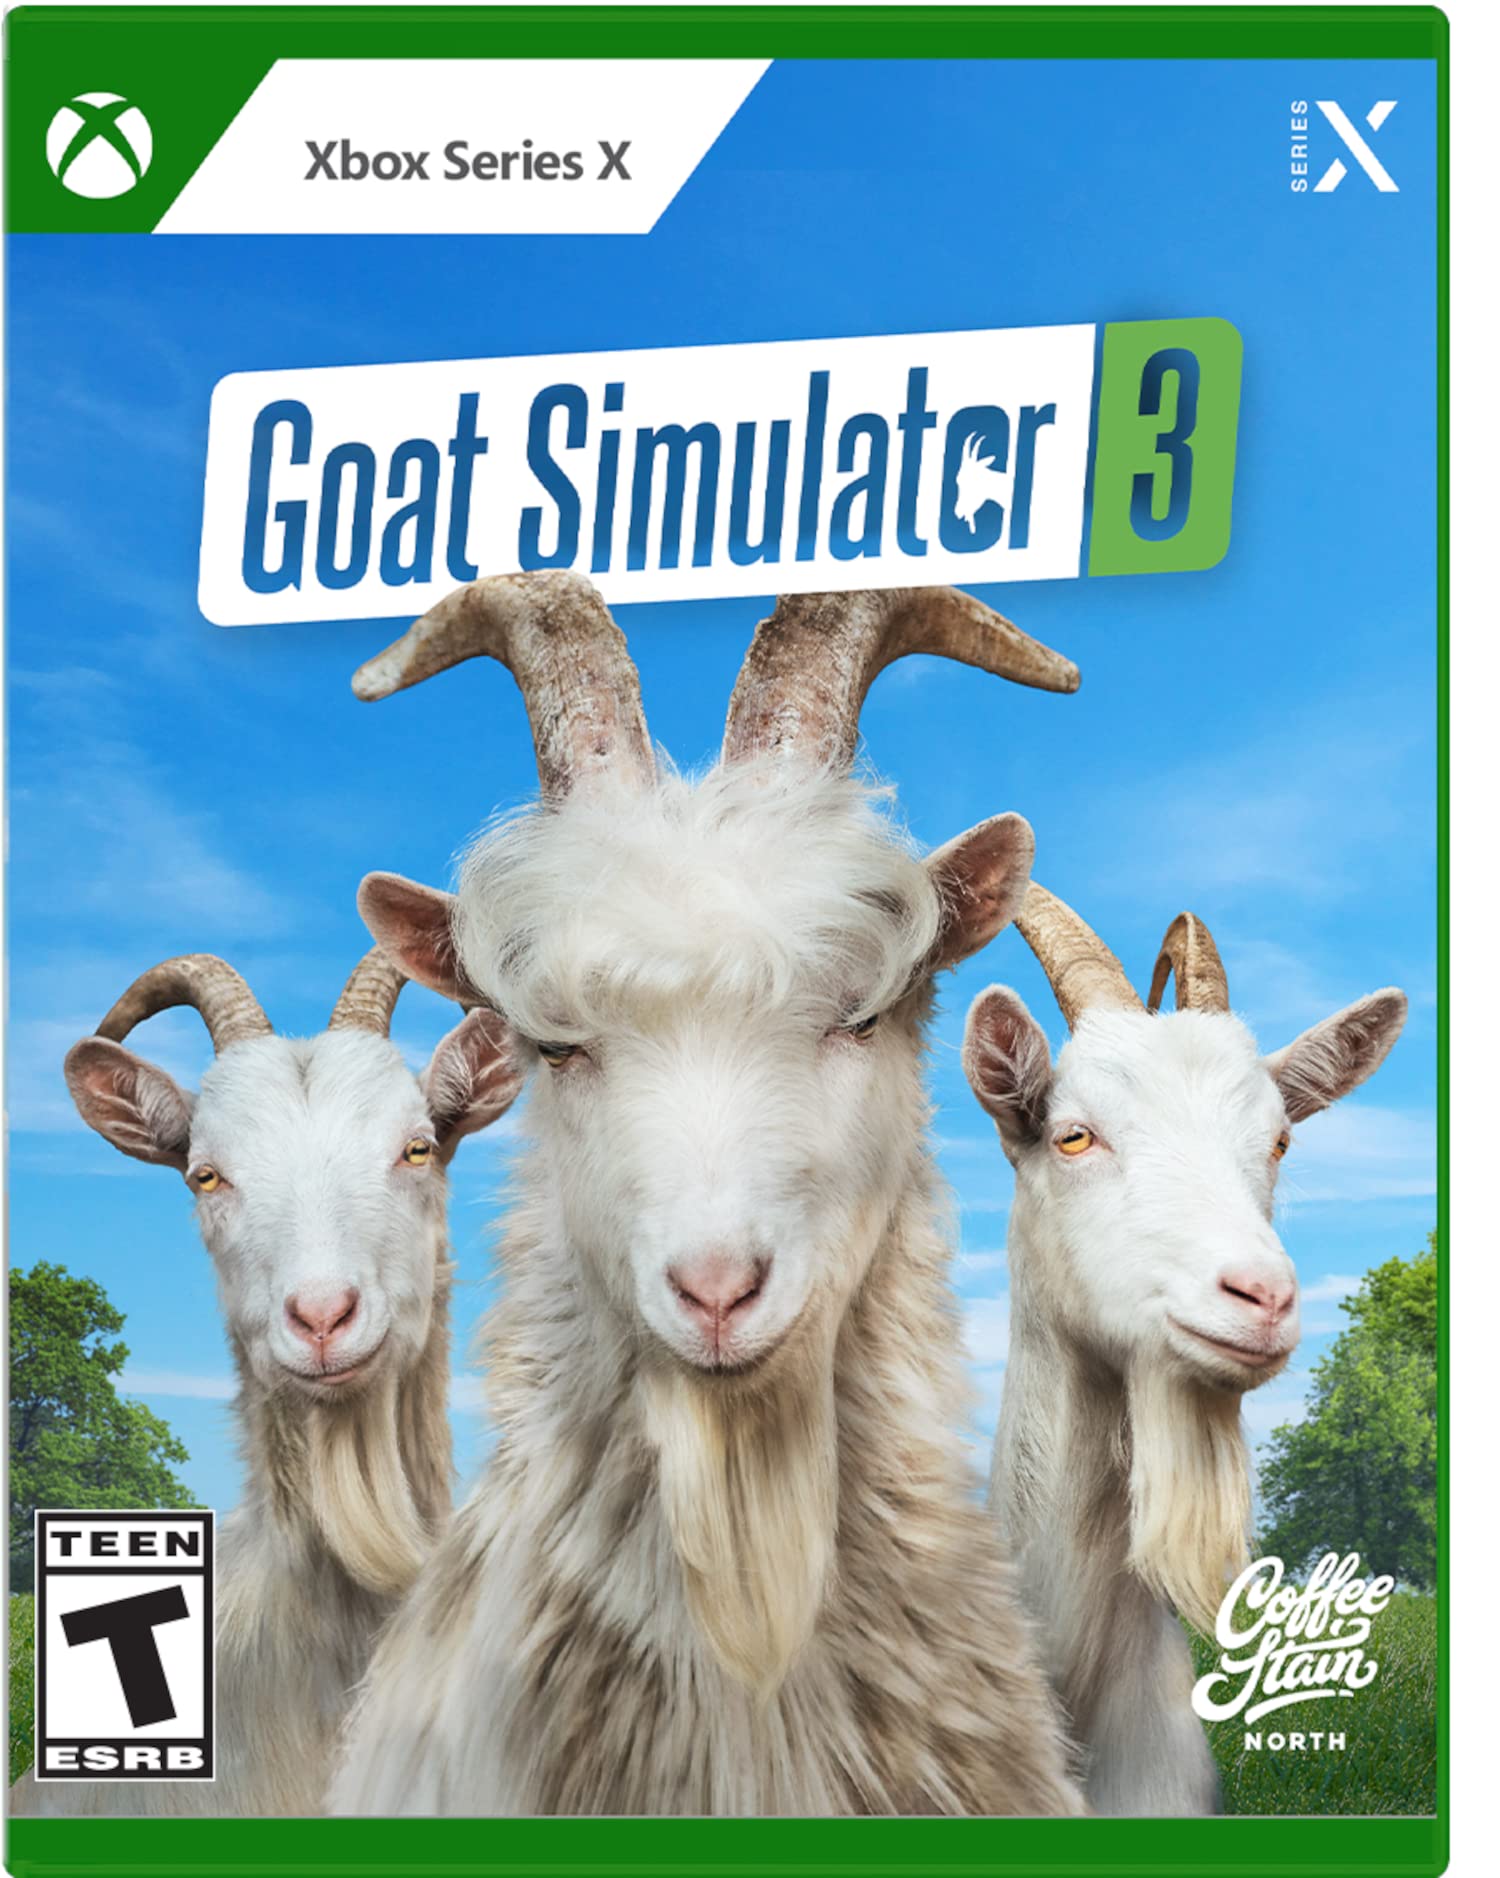 Goat Simulator 3 Video Game (Xbox Series X, Physical) $5 + Free Shipping w/ Prime or on $35+